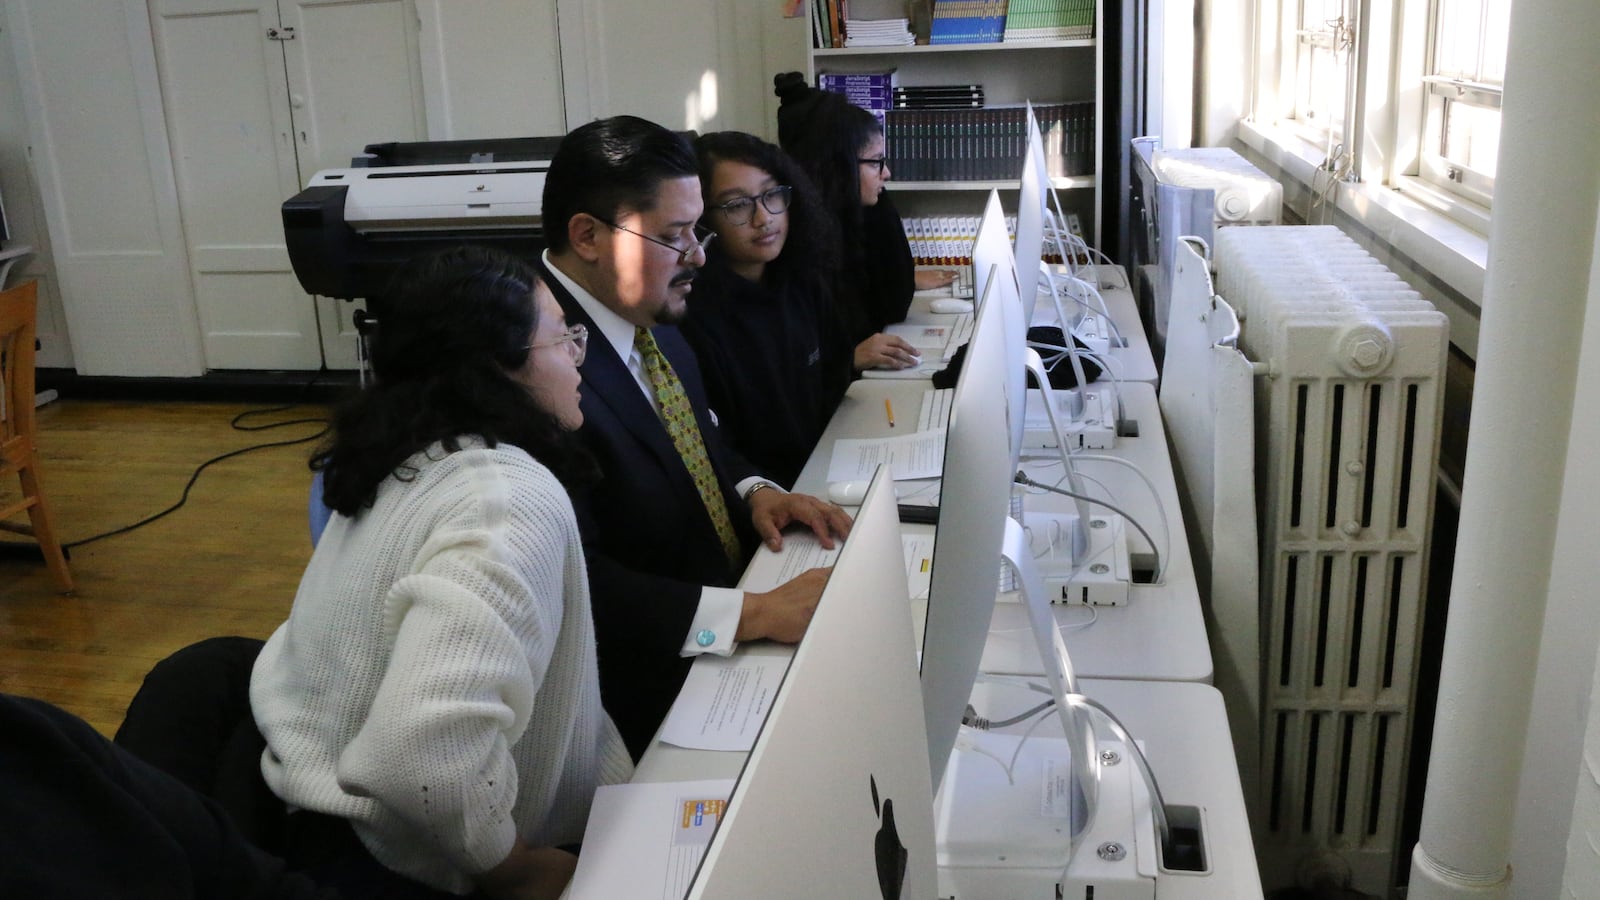 Students at Williamsburg High School of Arts and Technology teach Chancellor Richard Carranza how to code, ahead of an announcement Thursday on an expansion of CTE programs.